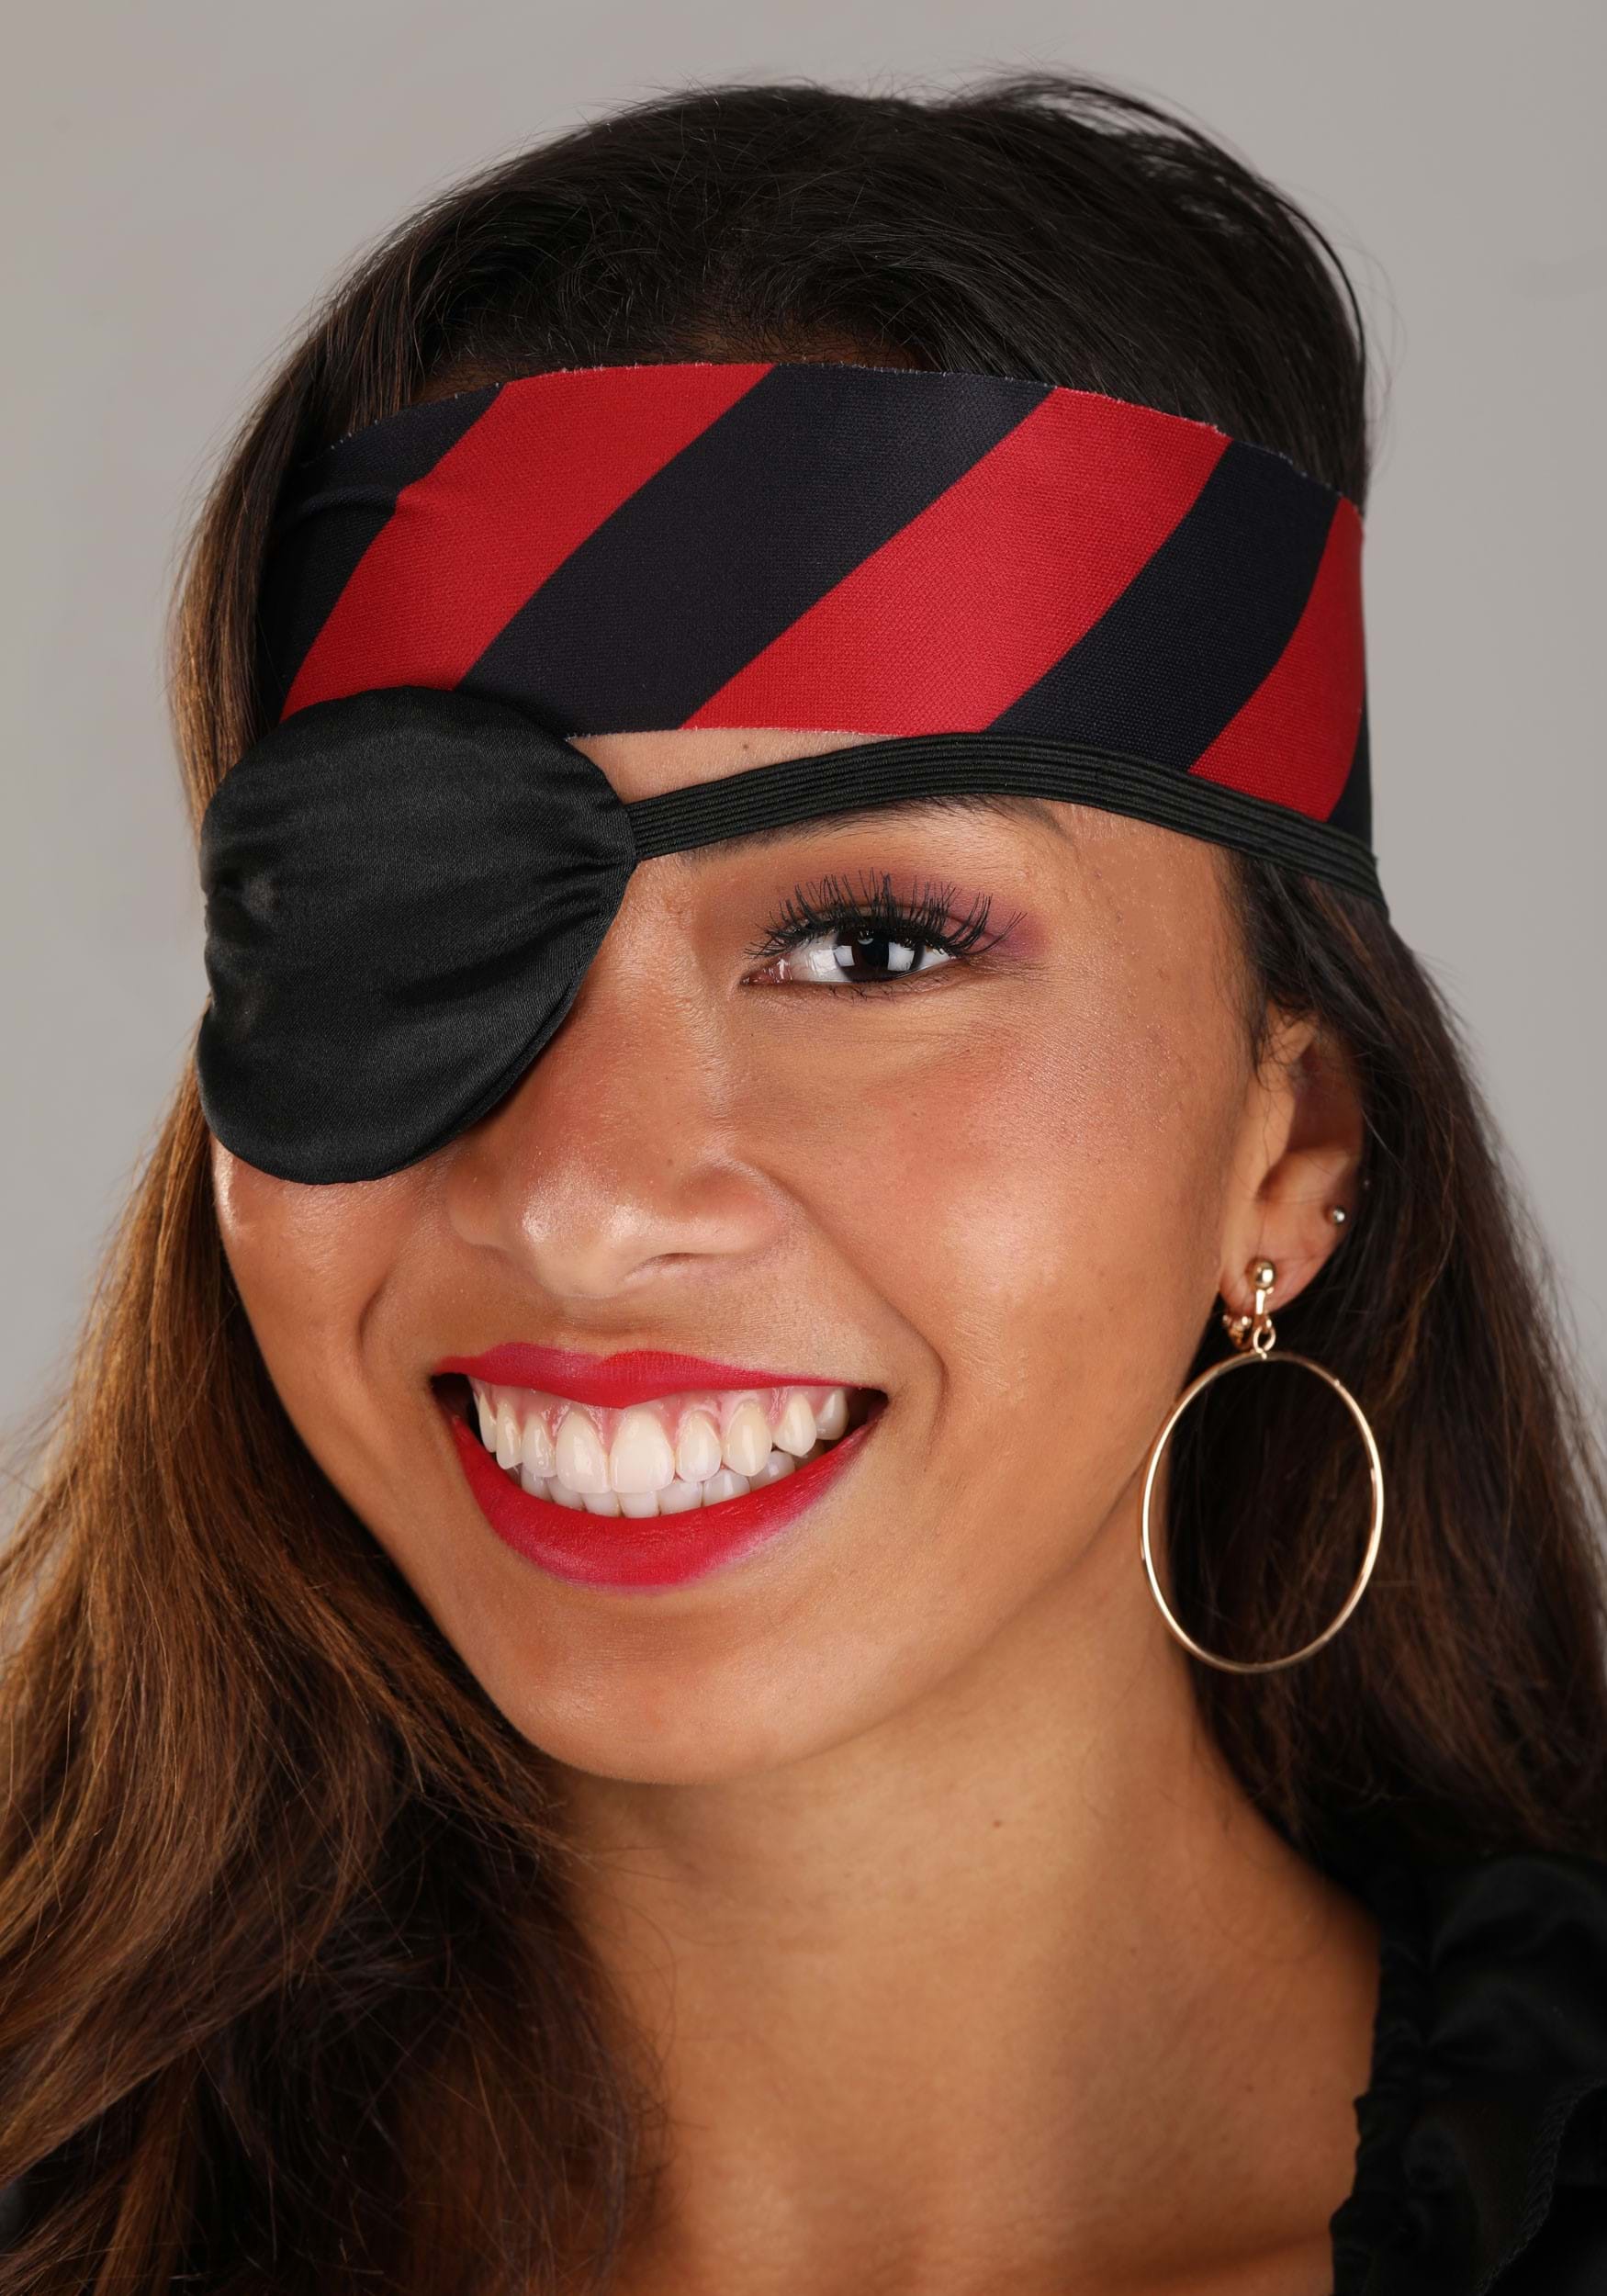 https://images.halloweencostumes.com/products/81039/1-1/pirate-eye-patch-and-earring-accessory-kit.jpg